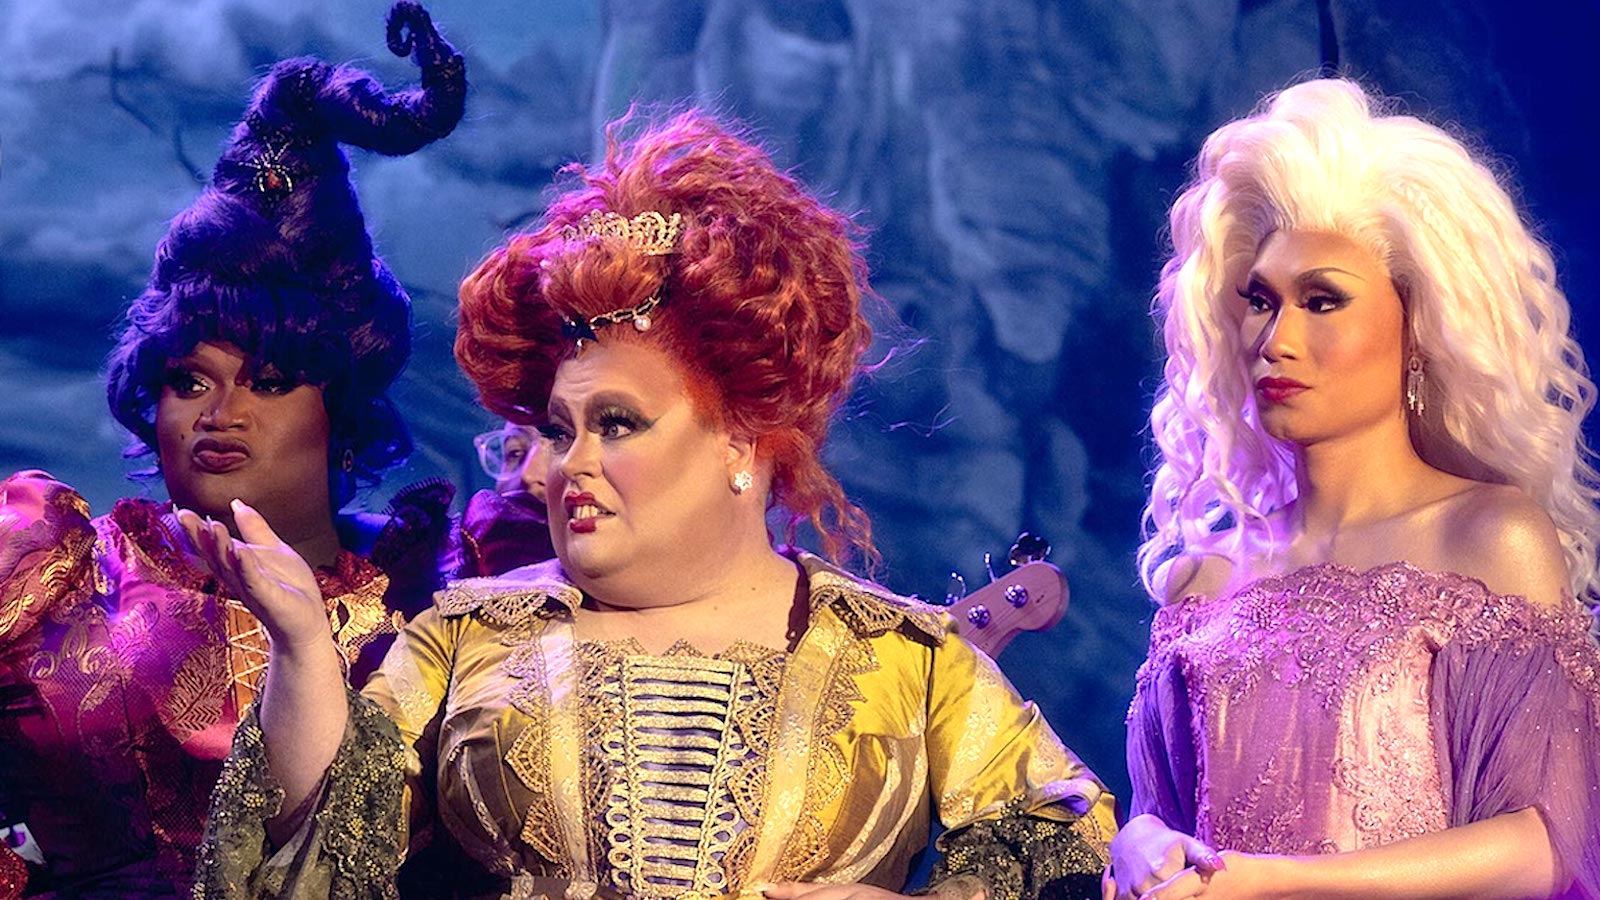 (L- R) Kornbread, Ginger Minj, and Kahmora Hall from 'RuPaul's Drag Race' dressed in drag as the Sanderson Sisters in 'Hocus Pocus 2'